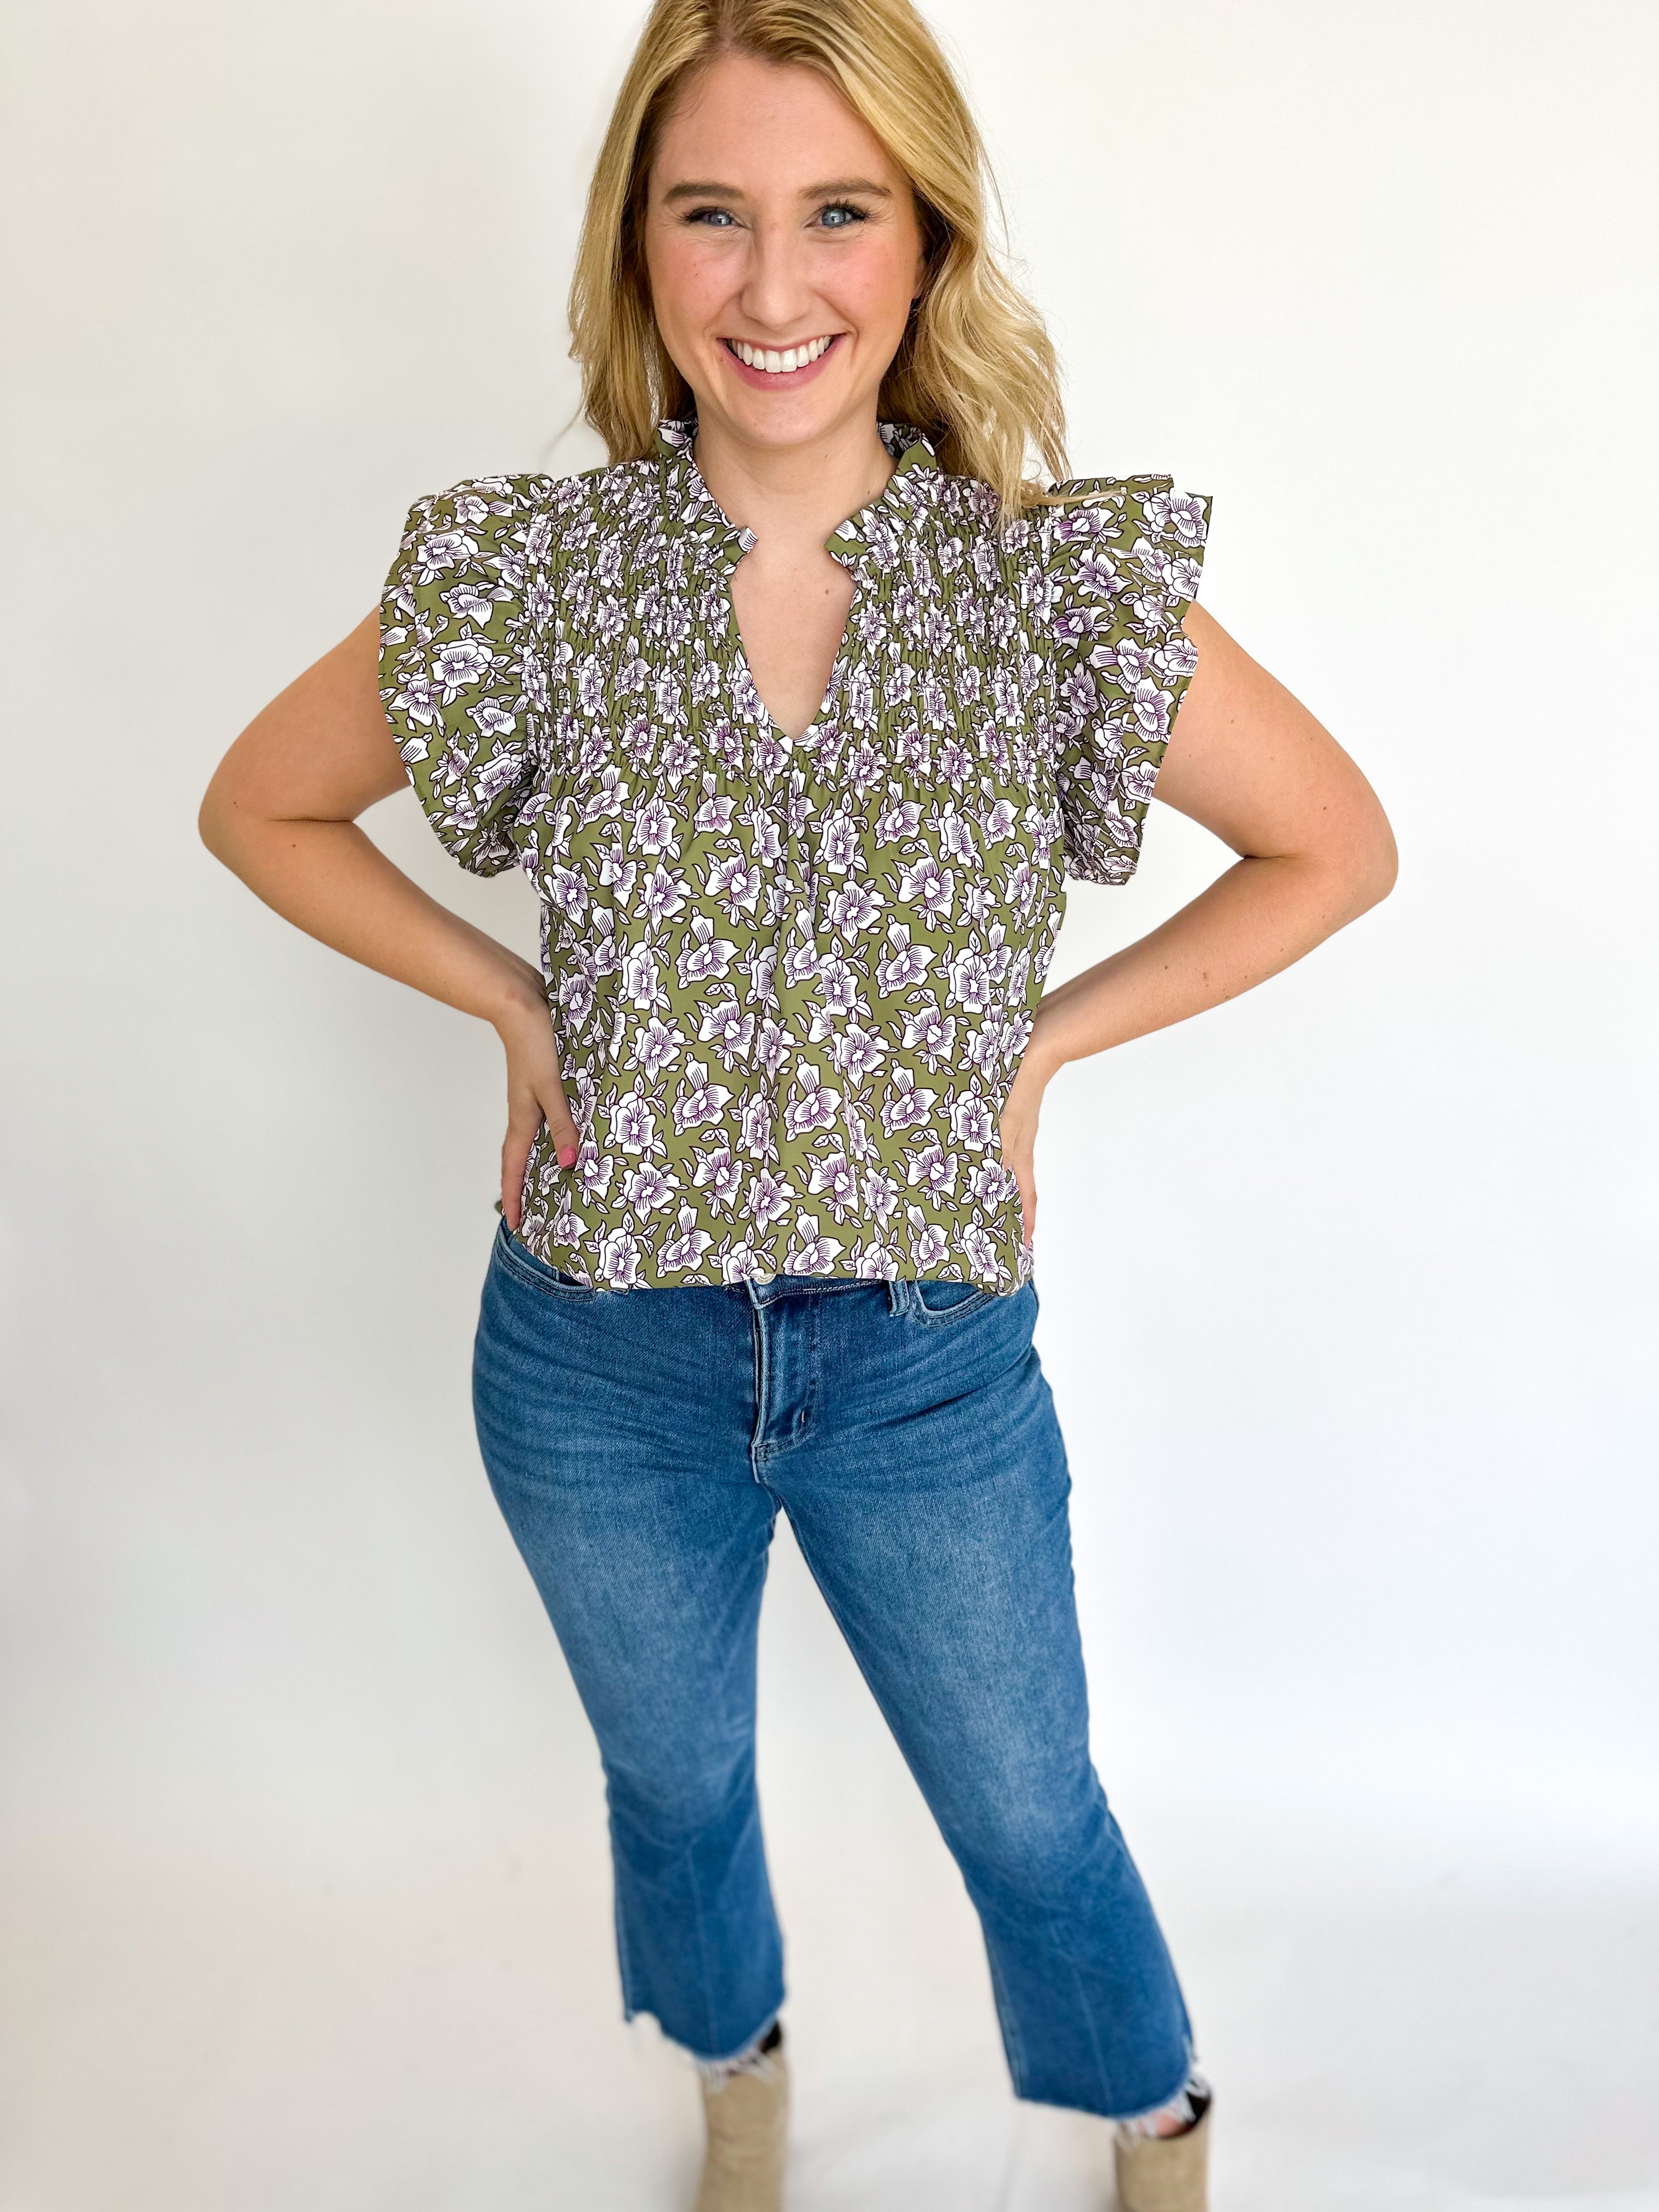 Fall Garden Blouse - THML-200 Fashion Blouses-THML-July & June Women's Fashion Boutique Located in San Antonio, Texas